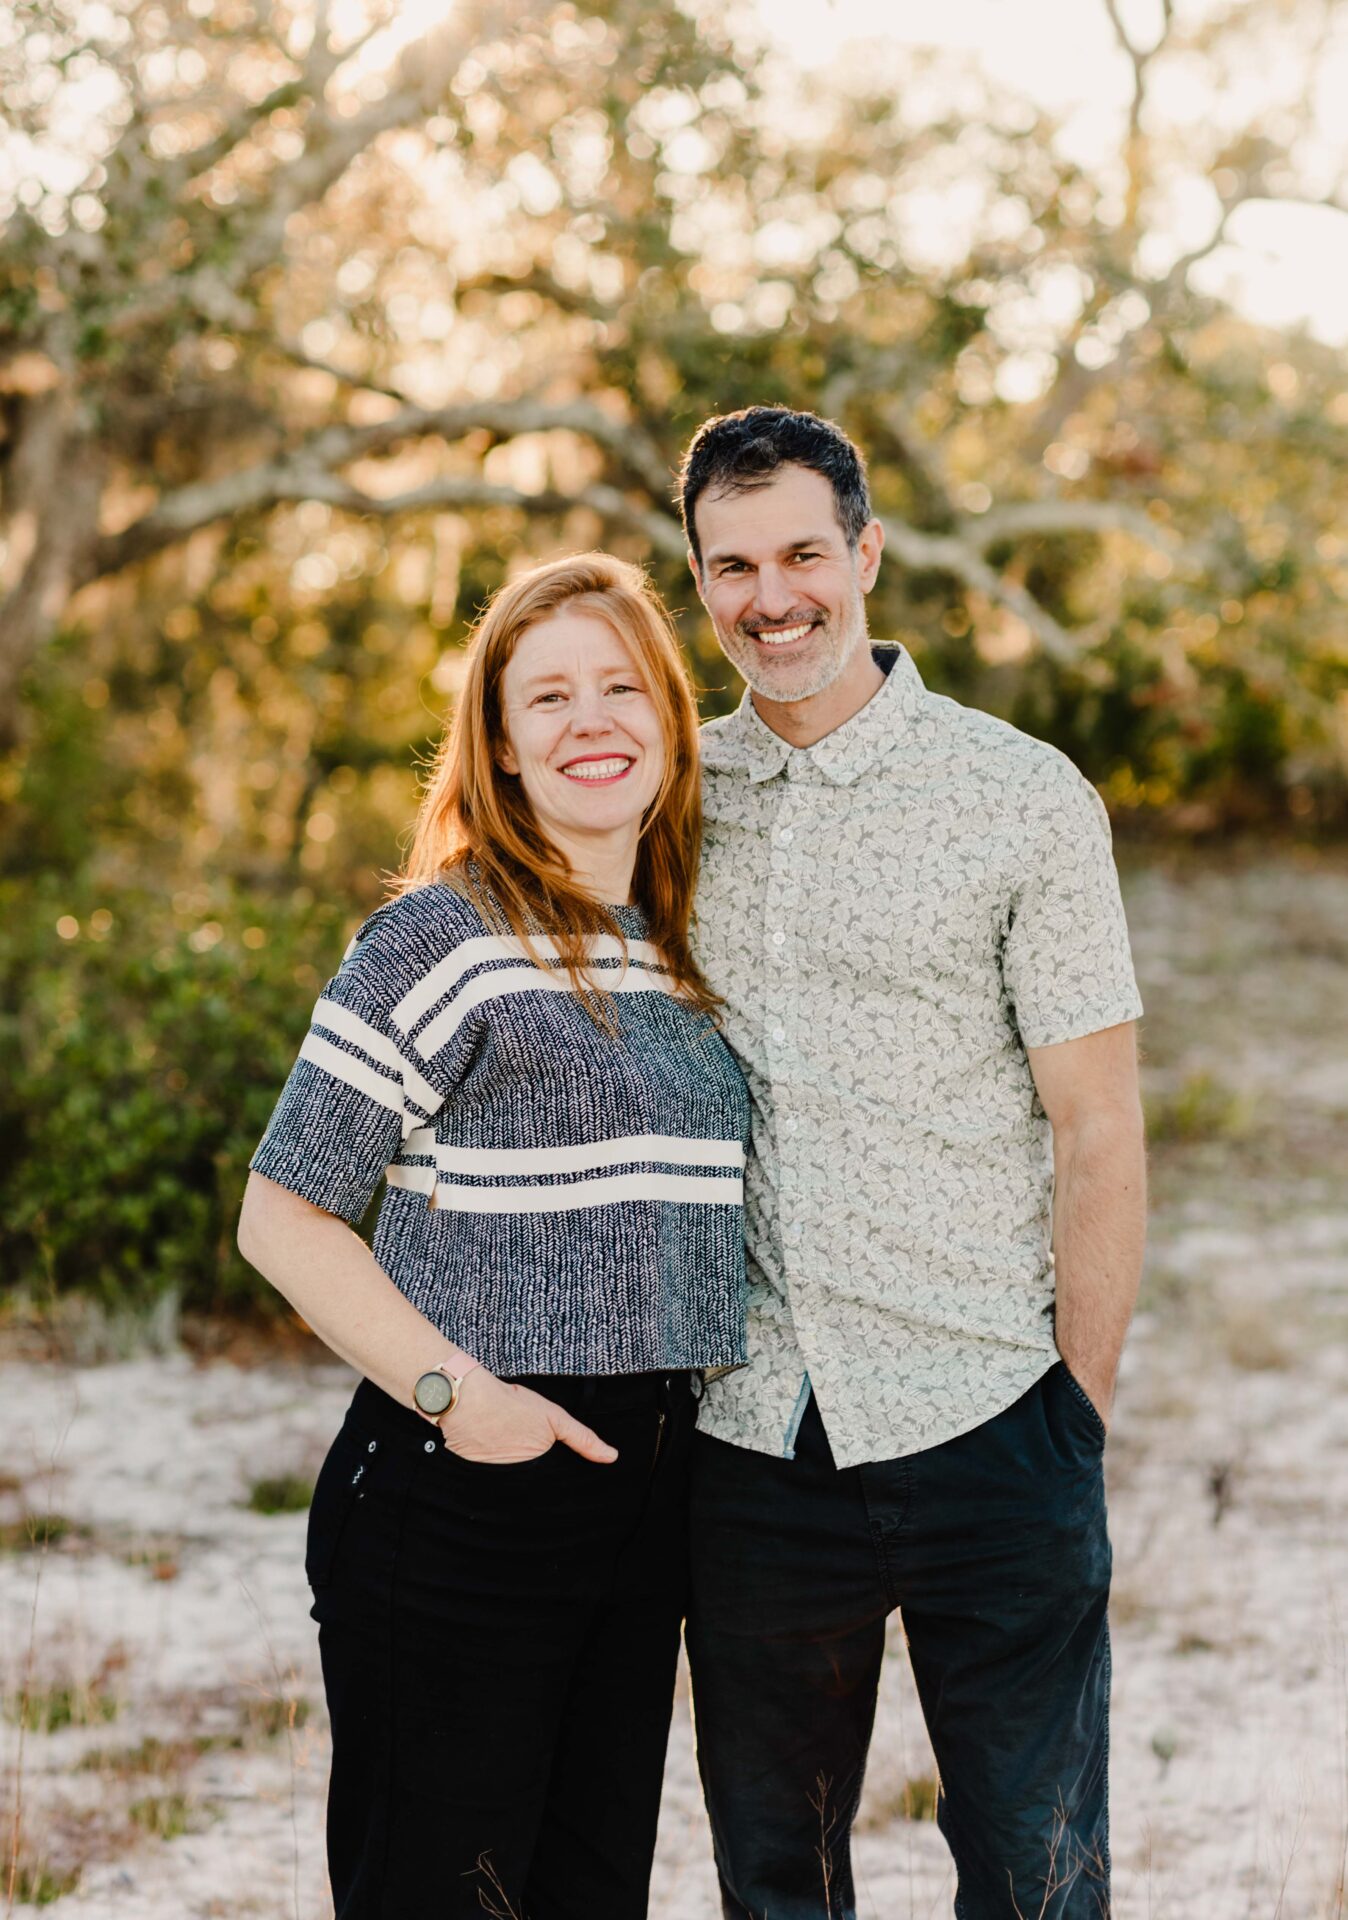 Two people stand embracing, smiling in front of a natural backdrop with trees and sunlight. They're dressed casually, conveying warmth and happiness.